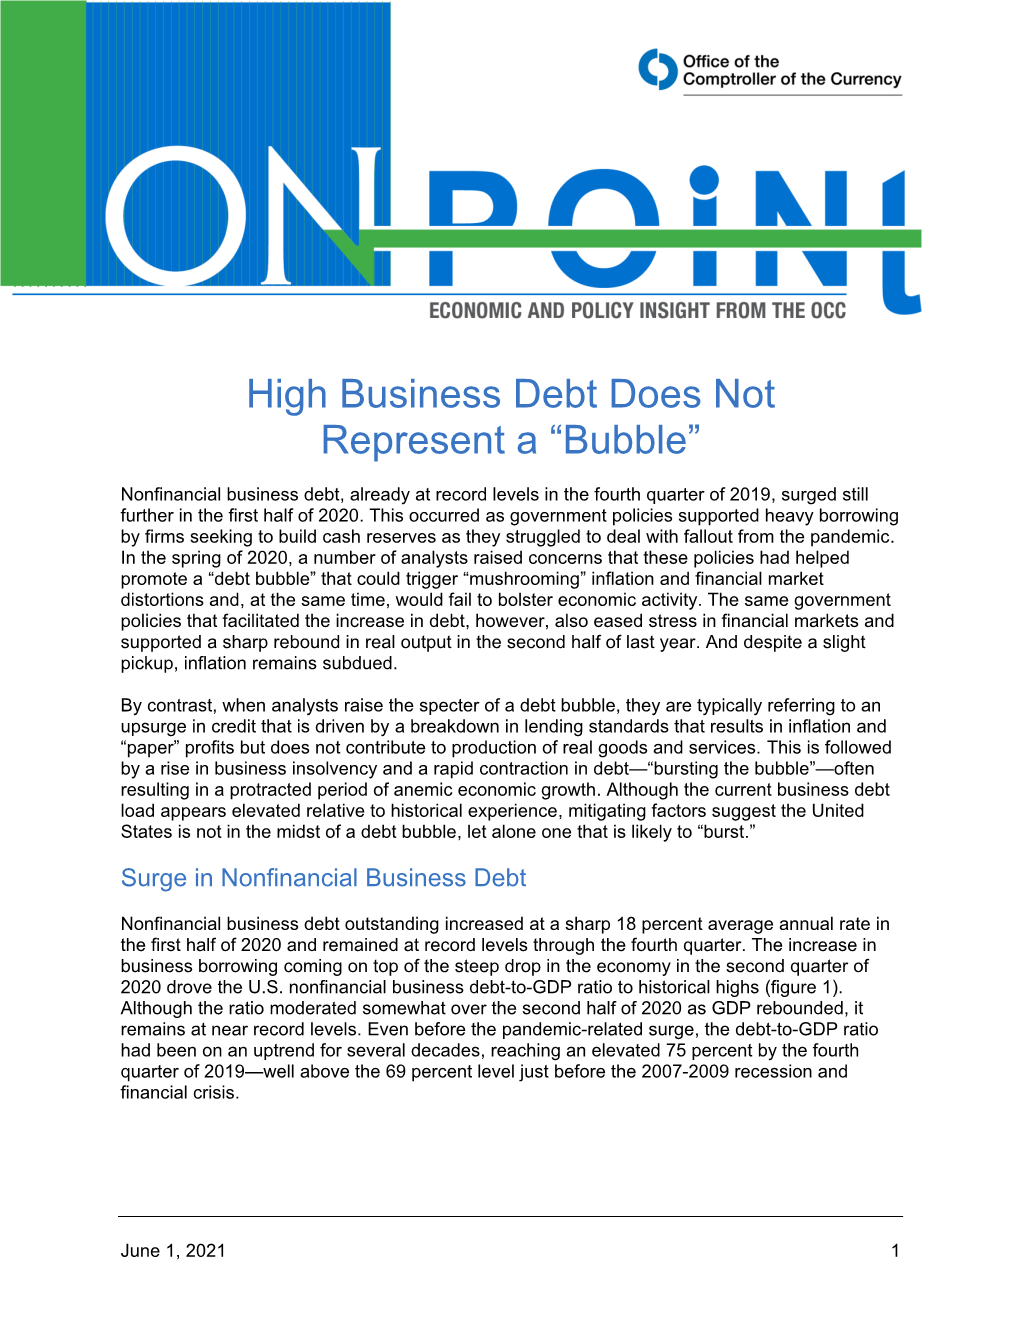 OCC on Point: High Business Debt Does Not Represent a “Bubble”